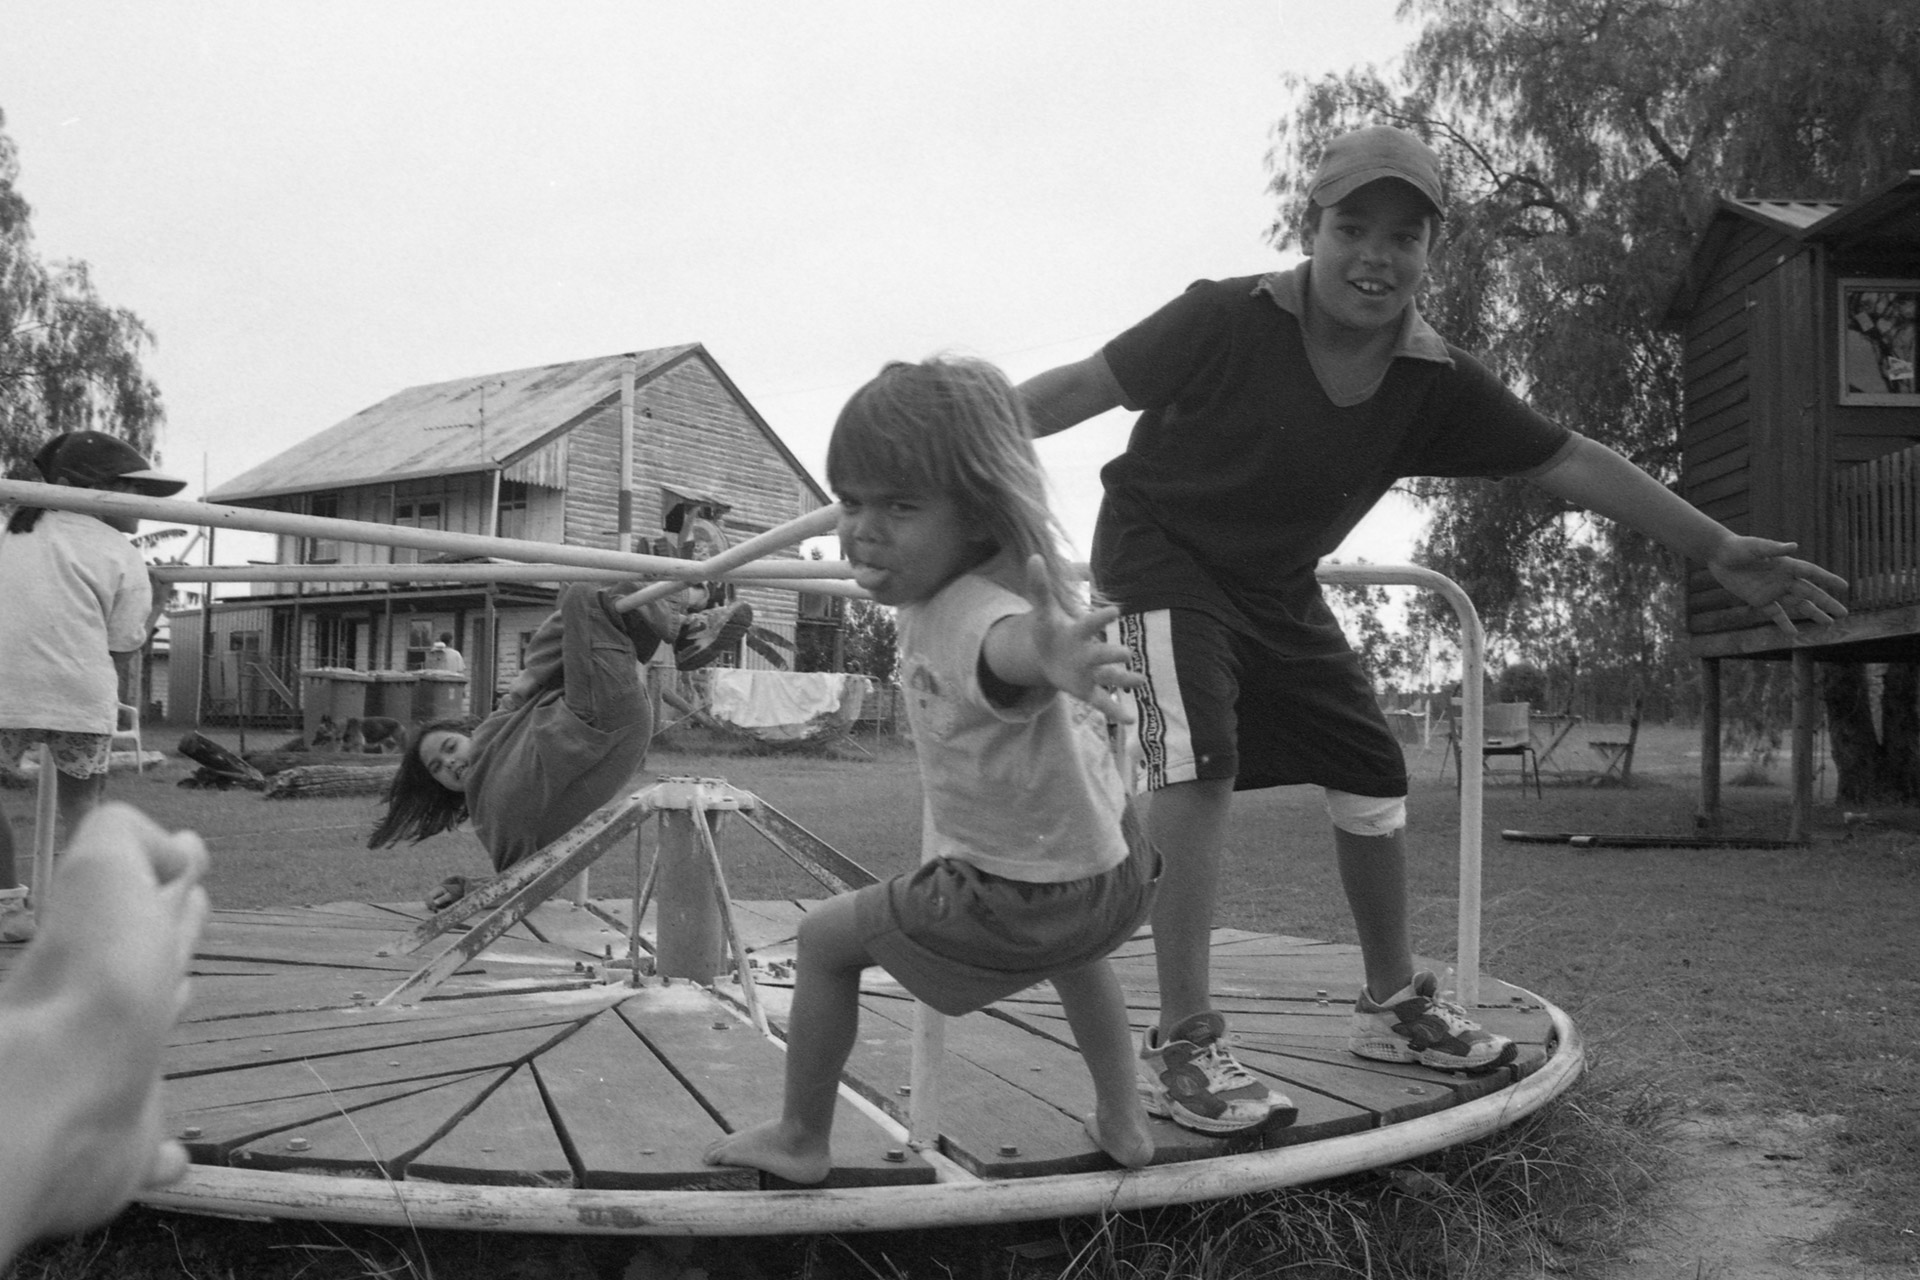 Children playing on a merry-go-round in Coominya, Queensland